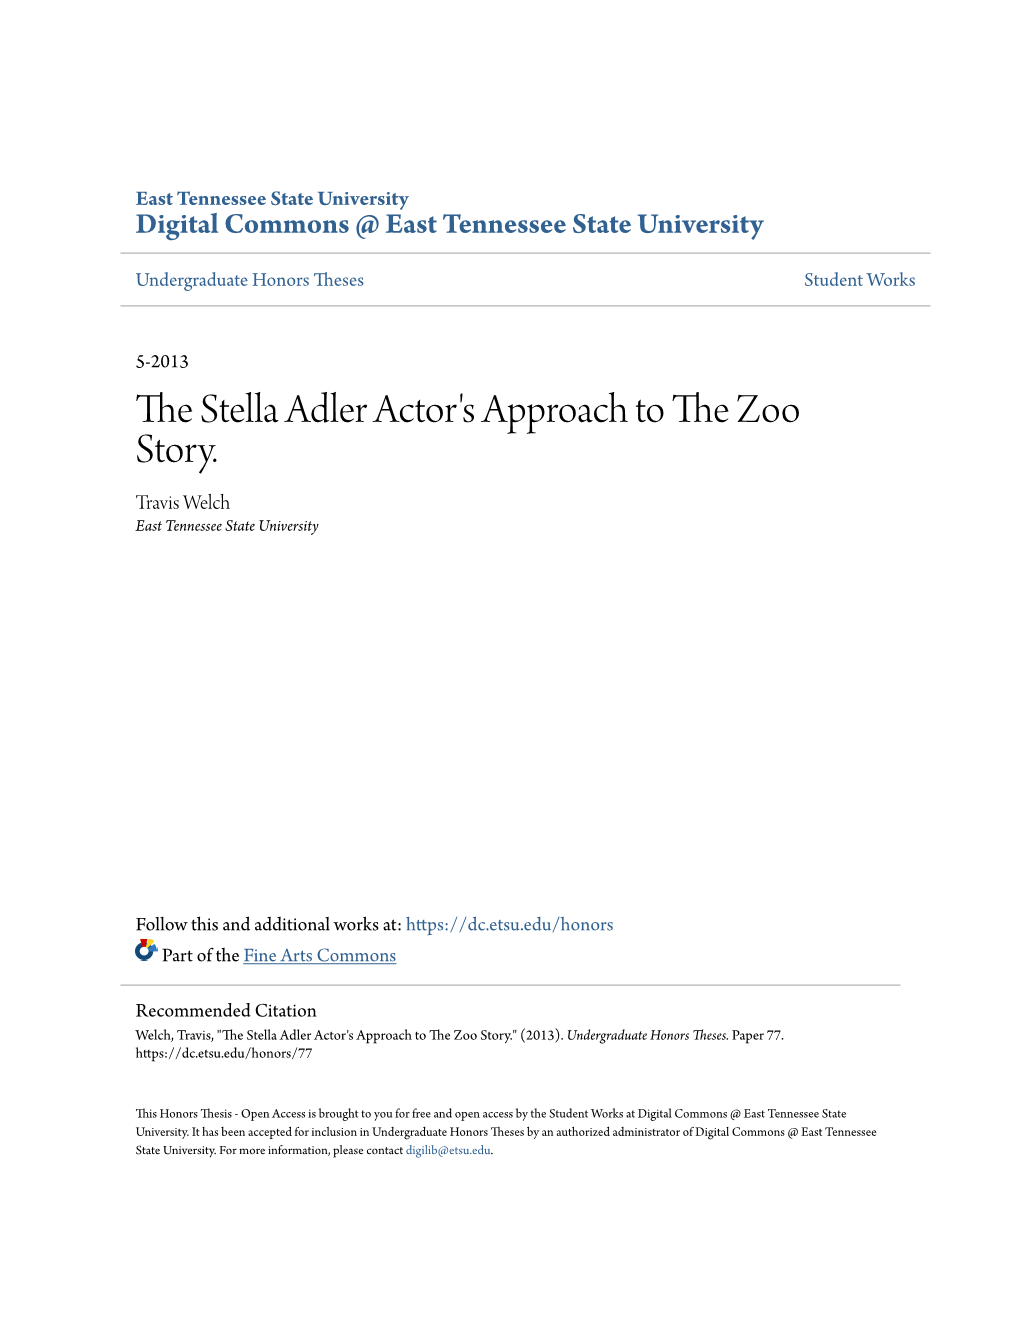 The Stella Adler Actor's Approach to the Zoo Story